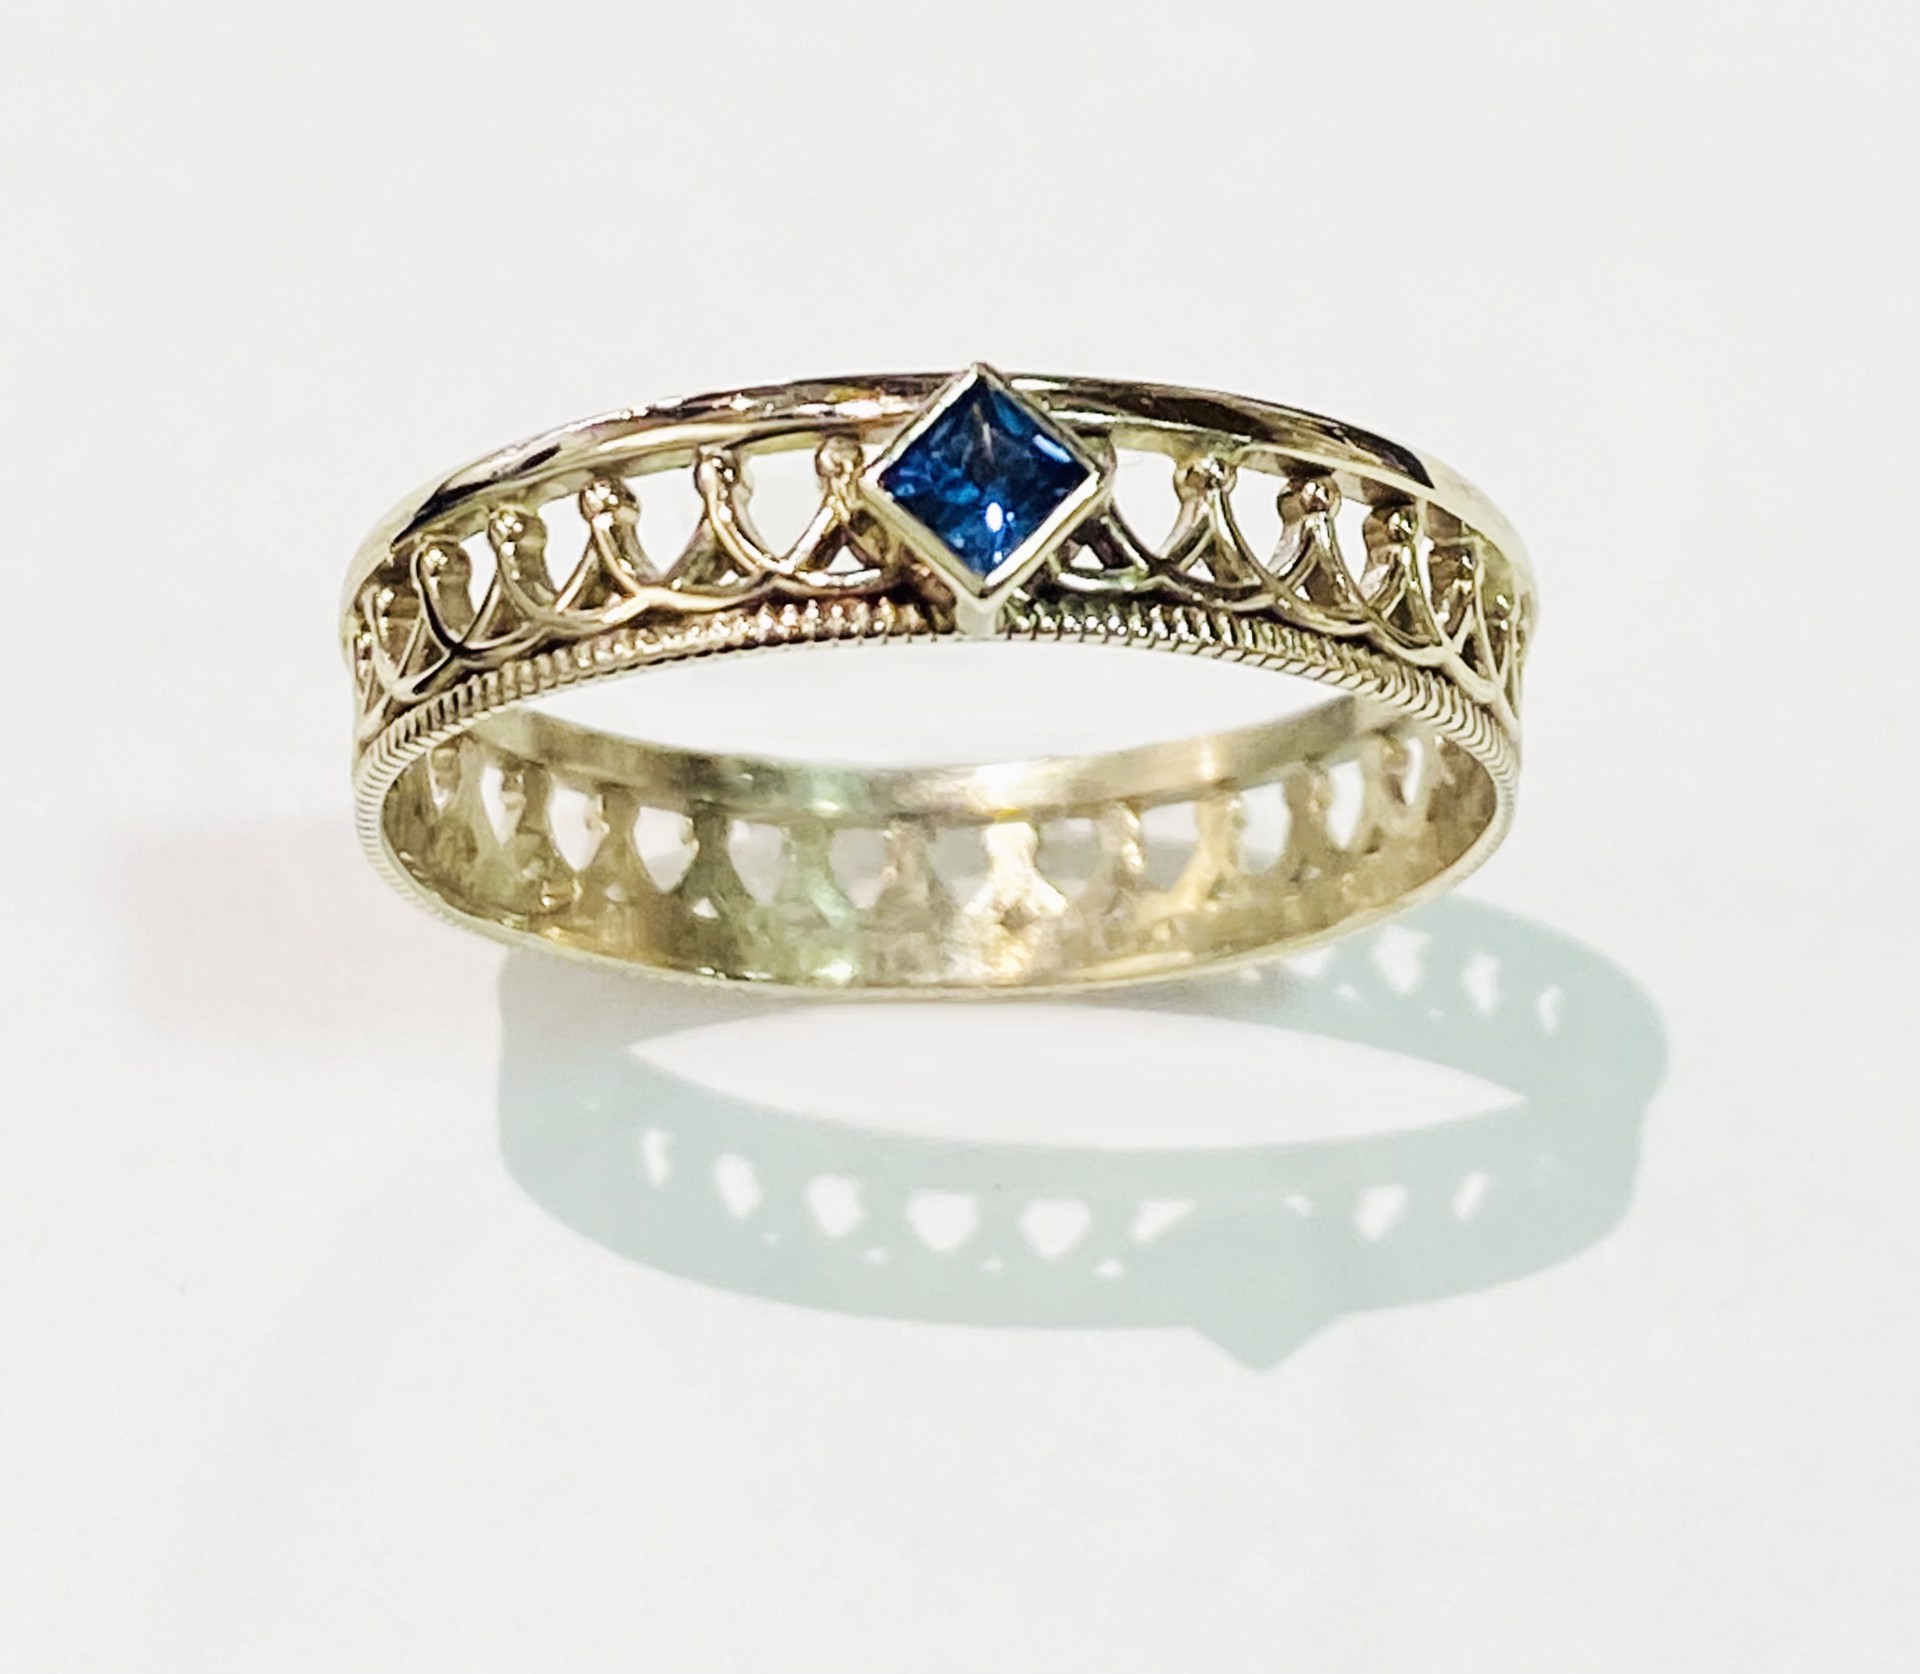 Sapphire Crown Ring by D'ETTE DELFORGE